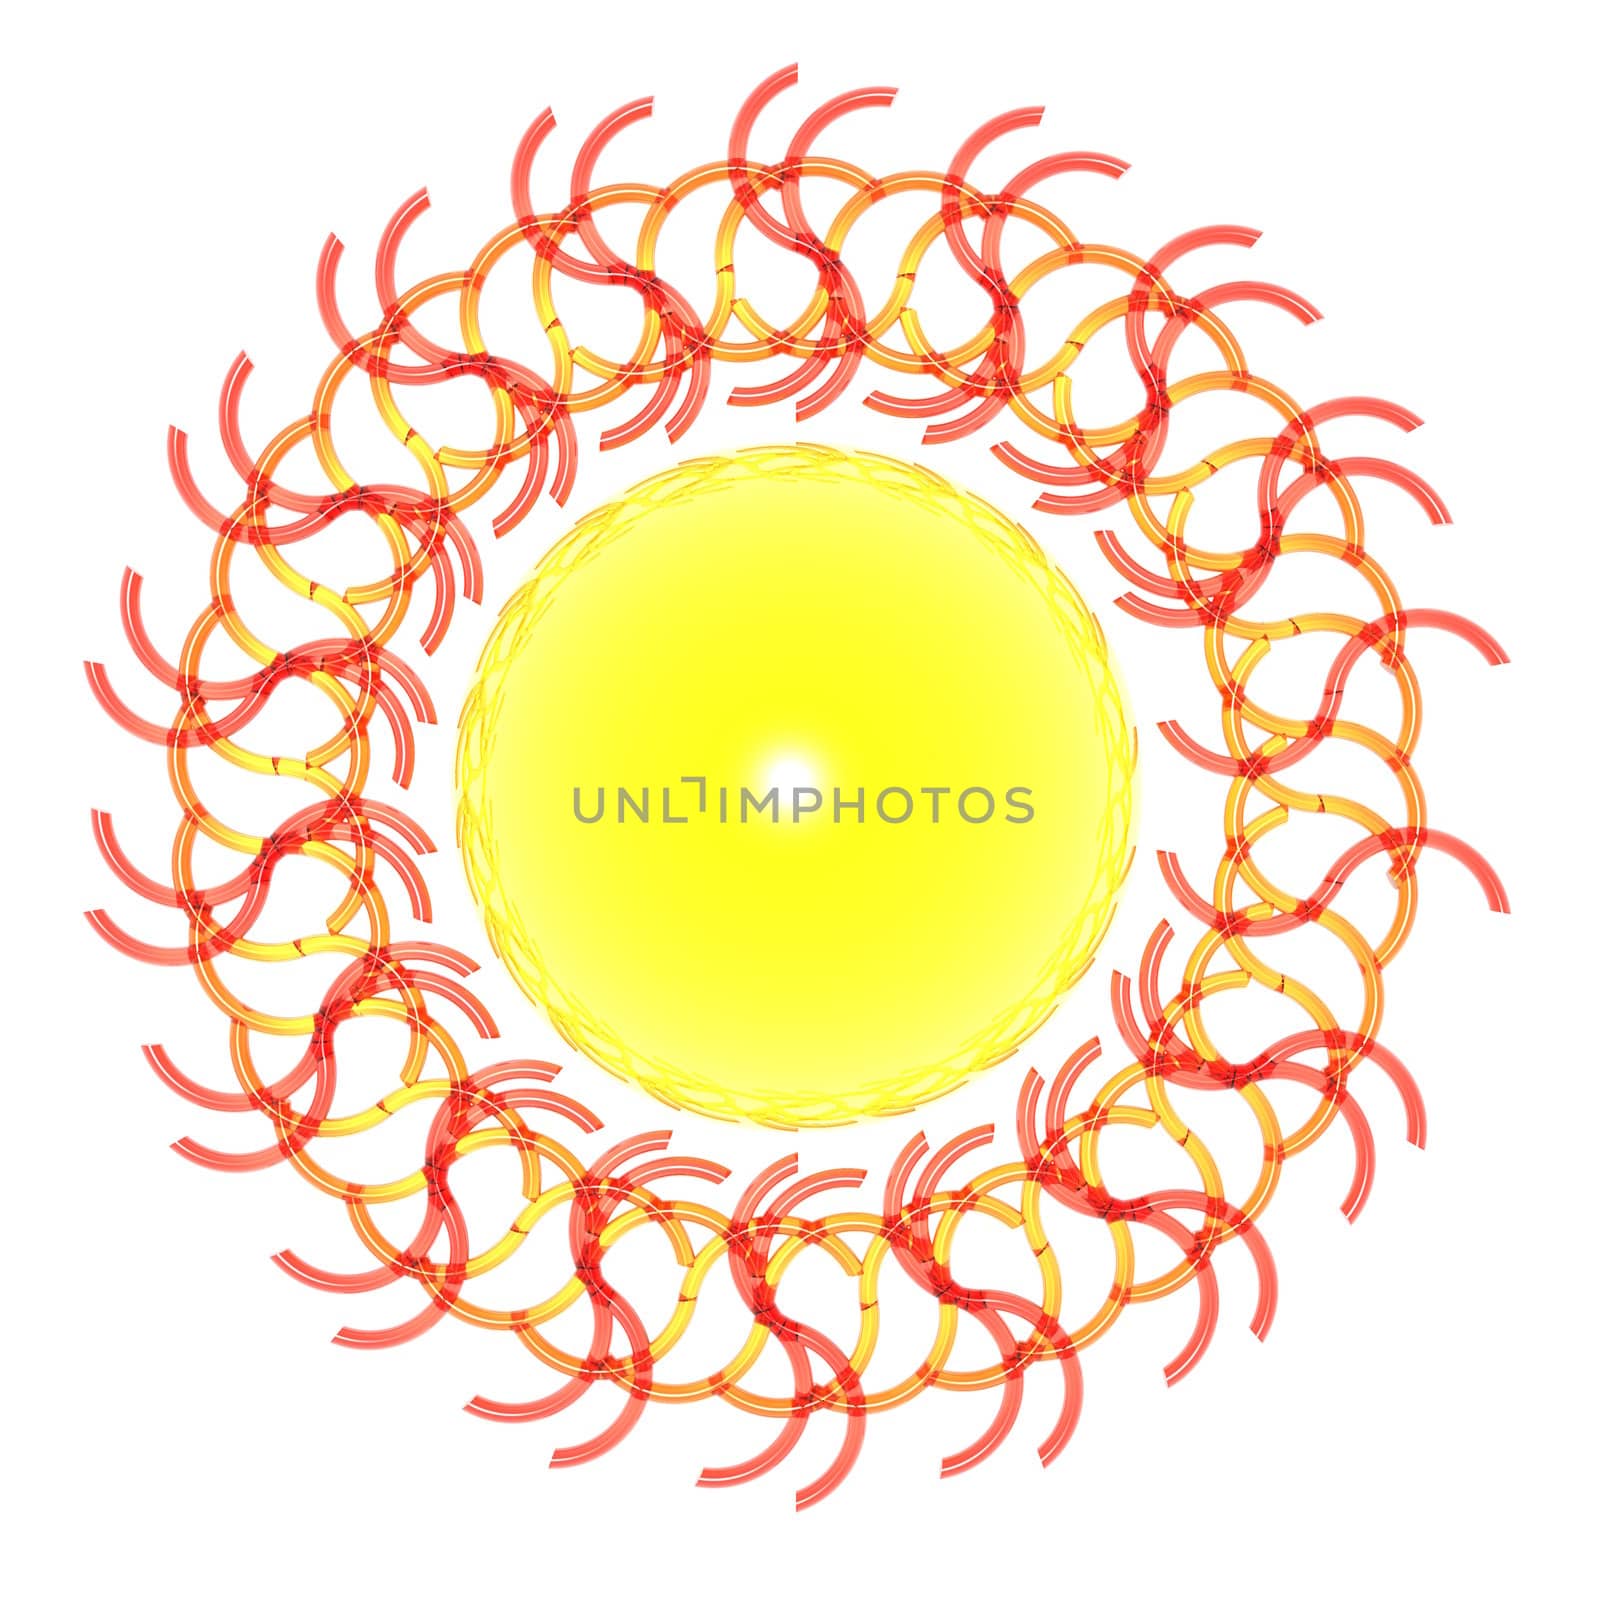 An illustration of the sun isolated on a white background.